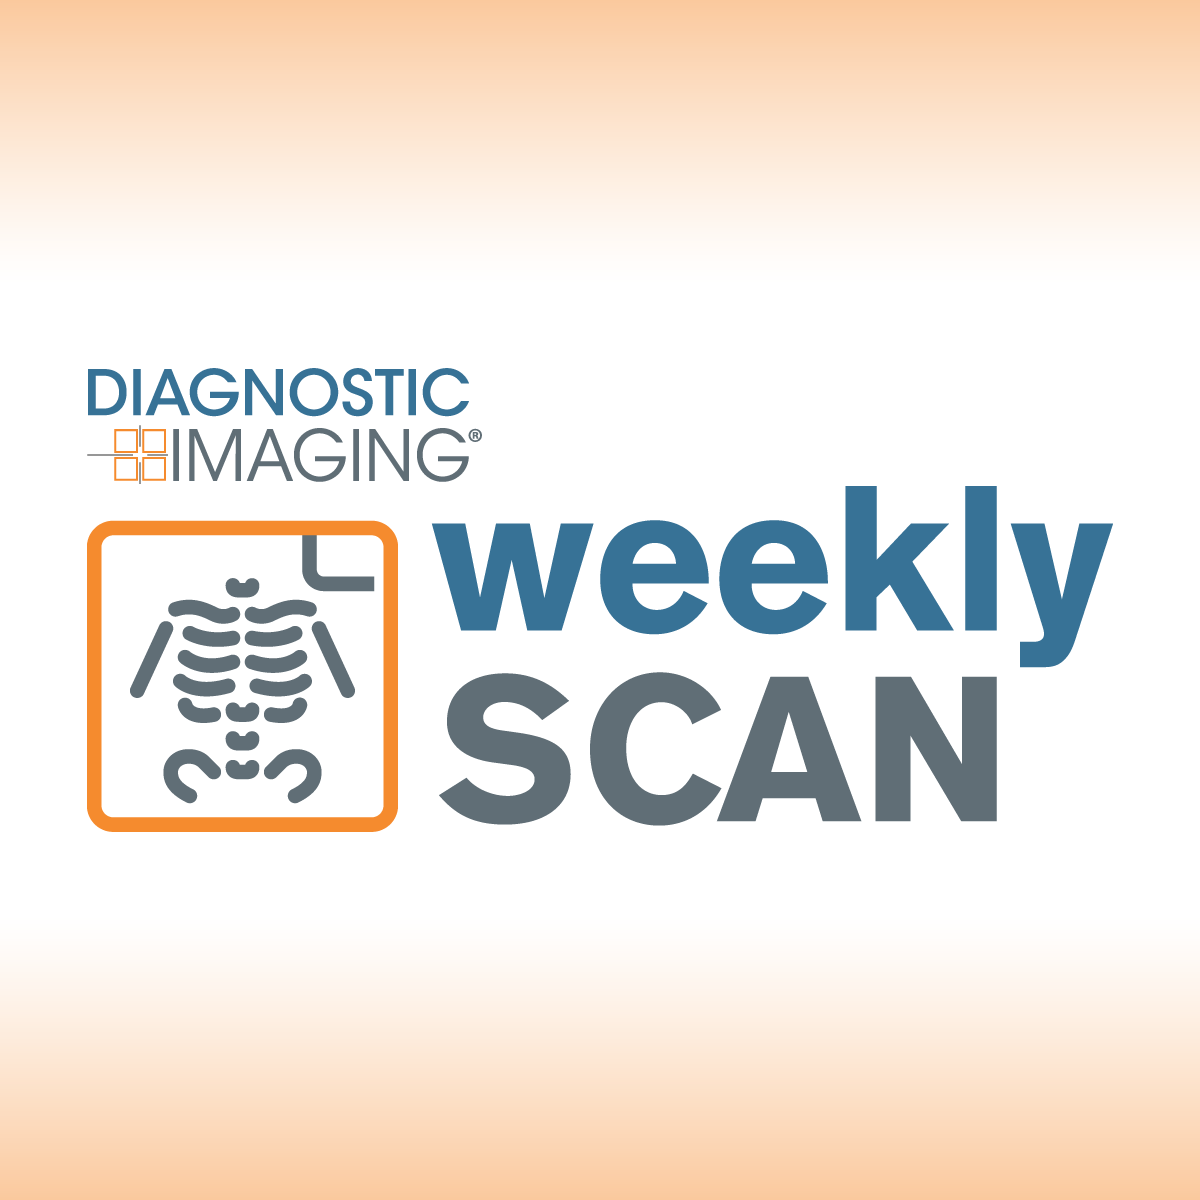 Diagnostic Imaging's Weekly Scan: July 9-July 15